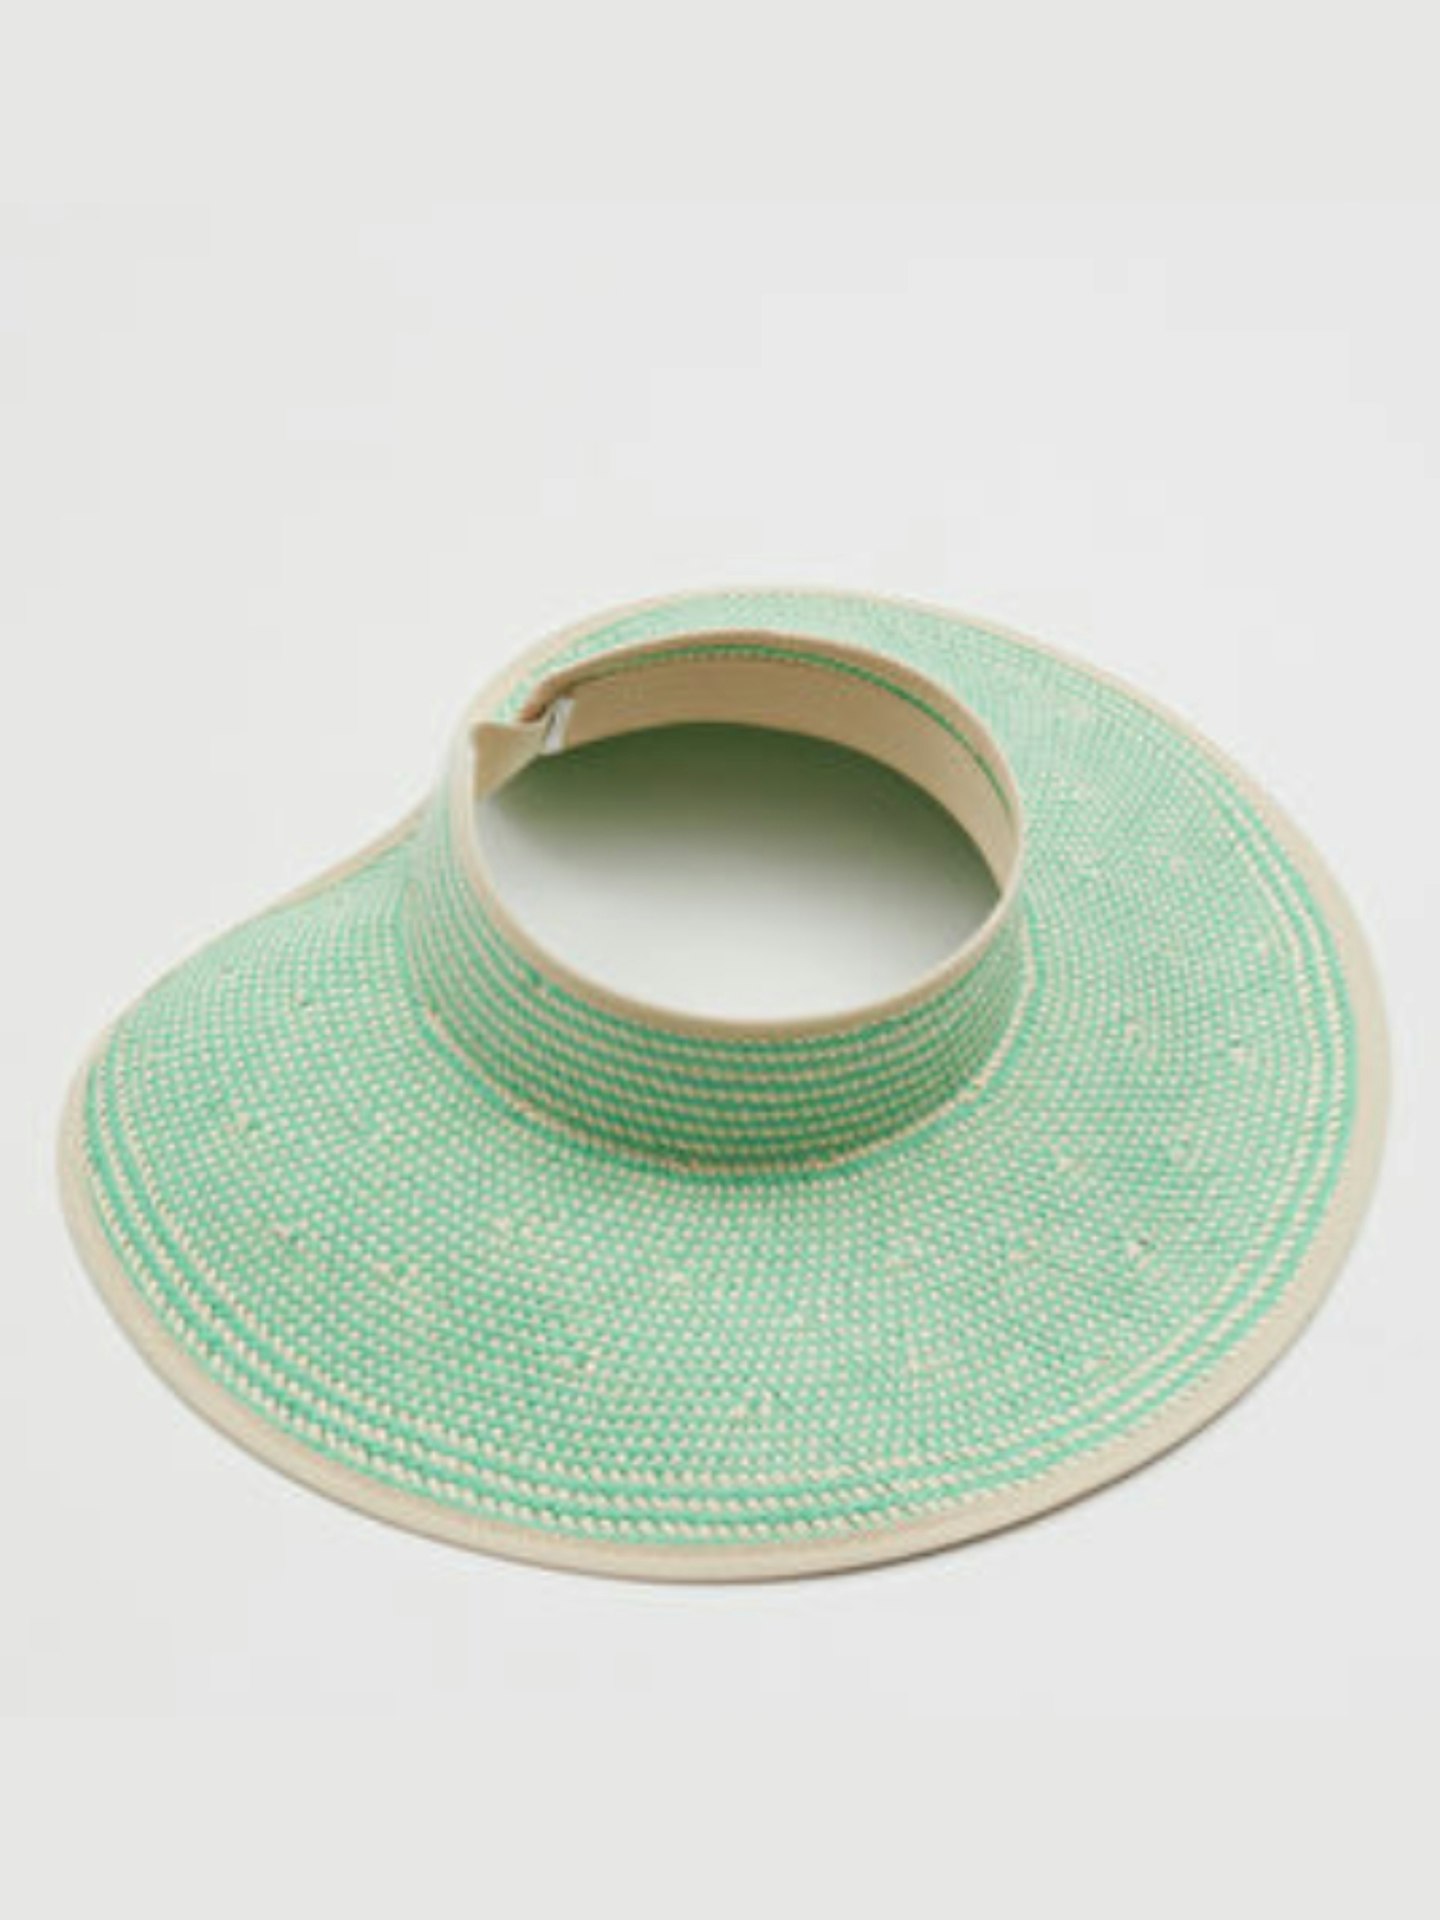 & Other Stories Woven Straw Visor